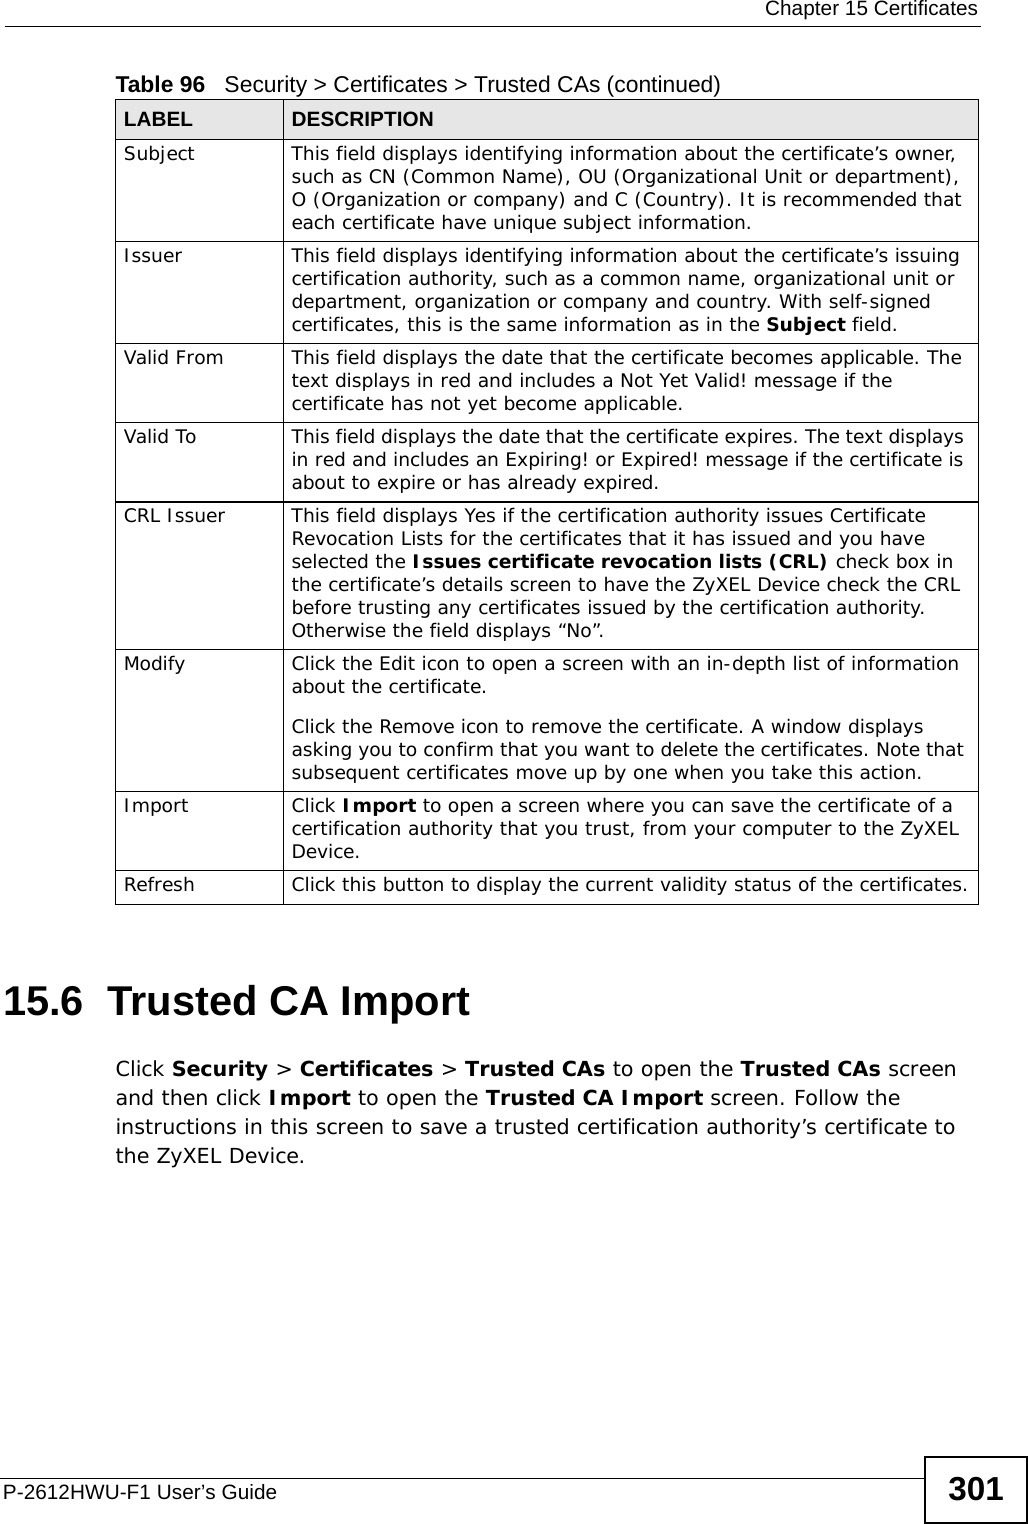  Chapter 15 CertificatesP-2612HWU-F1 User’s Guide 30115.6  Trusted CA Import   Click Security &gt; Certificates &gt; Trusted CAs to open the Trusted CAs screen and then click Import to open the Trusted CA Import screen. Follow the instructions in this screen to save a trusted certification authority’s certificate to the ZyXEL Device.Subject This field displays identifying information about the certificate’s owner, such as CN (Common Name), OU (Organizational Unit or department), O (Organization or company) and C (Country). It is recommended that each certificate have unique subject information.Issuer This field displays identifying information about the certificate’s issuing certification authority, such as a common name, organizational unit or department, organization or company and country. With self-signed certificates, this is the same information as in the Subject field.Valid From This field displays the date that the certificate becomes applicable. The text displays in red and includes a Not Yet Valid! message if the certificate has not yet become applicable.Valid To This field displays the date that the certificate expires. The text displays in red and includes an Expiring! or Expired! message if the certificate is about to expire or has already expired.CRL Issuer This field displays Yes if the certification authority issues Certificate Revocation Lists for the certificates that it has issued and you have selected the Issues certificate revocation lists (CRL) check box in the certificate’s details screen to have the ZyXEL Device check the CRL before trusting any certificates issued by the certification authority. Otherwise the field displays “No”.Modify Click the Edit icon to open a screen with an in-depth list of information about the certificate.Click the Remove icon to remove the certificate. A window displays asking you to confirm that you want to delete the certificates. Note that subsequent certificates move up by one when you take this action.Import Click Import to open a screen where you can save the certificate of a certification authority that you trust, from your computer to the ZyXEL Device.Refresh Click this button to display the current validity status of the certificates.Table 96   Security &gt; Certificates &gt; Trusted CAs (continued)LABEL DESCRIPTION